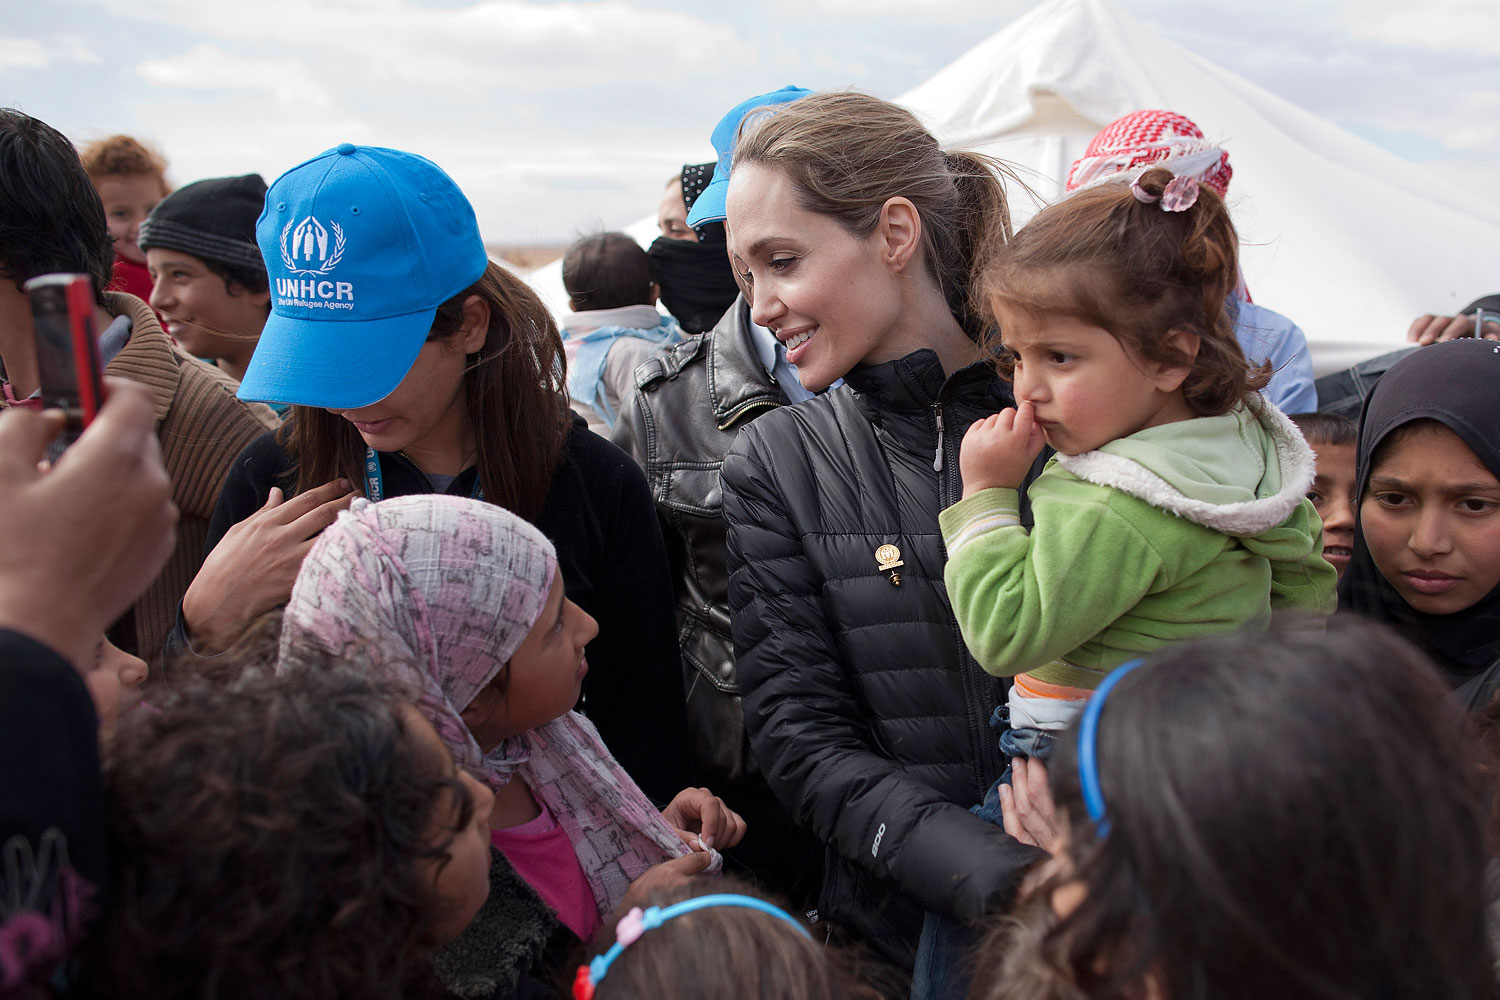 Angelina Jolie meets with refugees at the Zaatari refugee camp on Dec. 6, 2012 outside of Mafraq, Jordan.